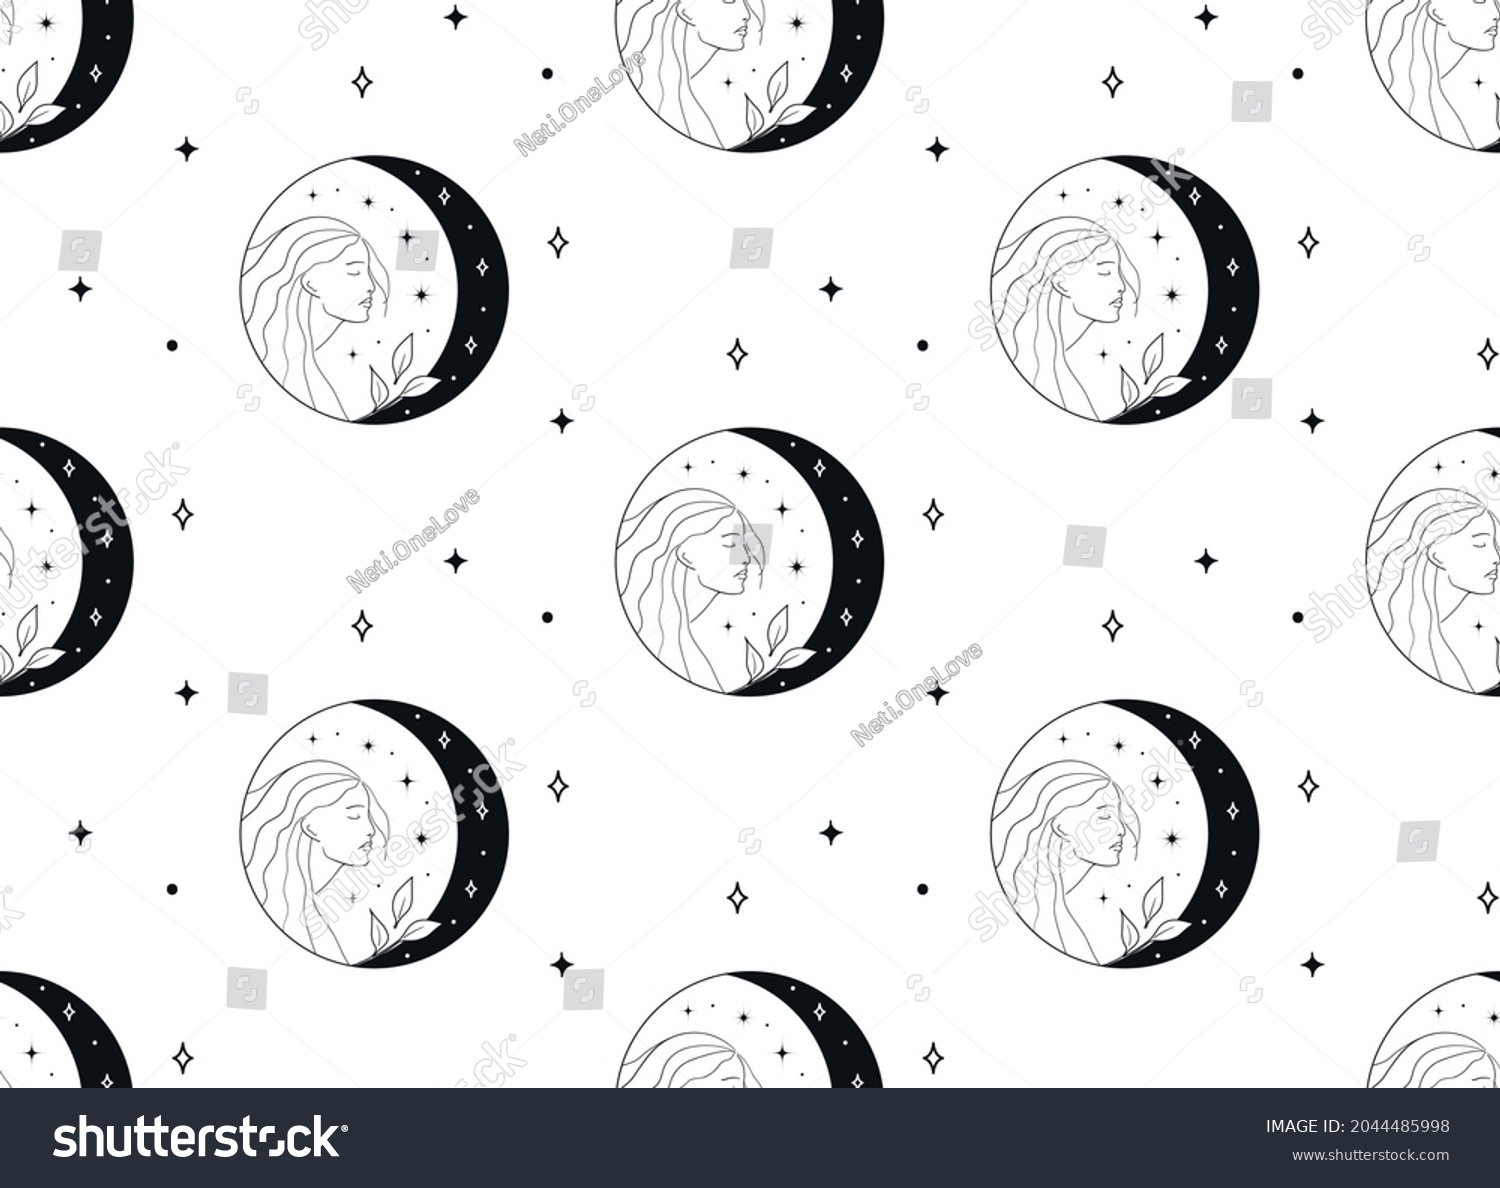 SVG of Abstract Background Seamless Pattern with Crescents, Stars, Rays, Dots. Mystic Design, Vector Illustration for wrapping tissue paper svg